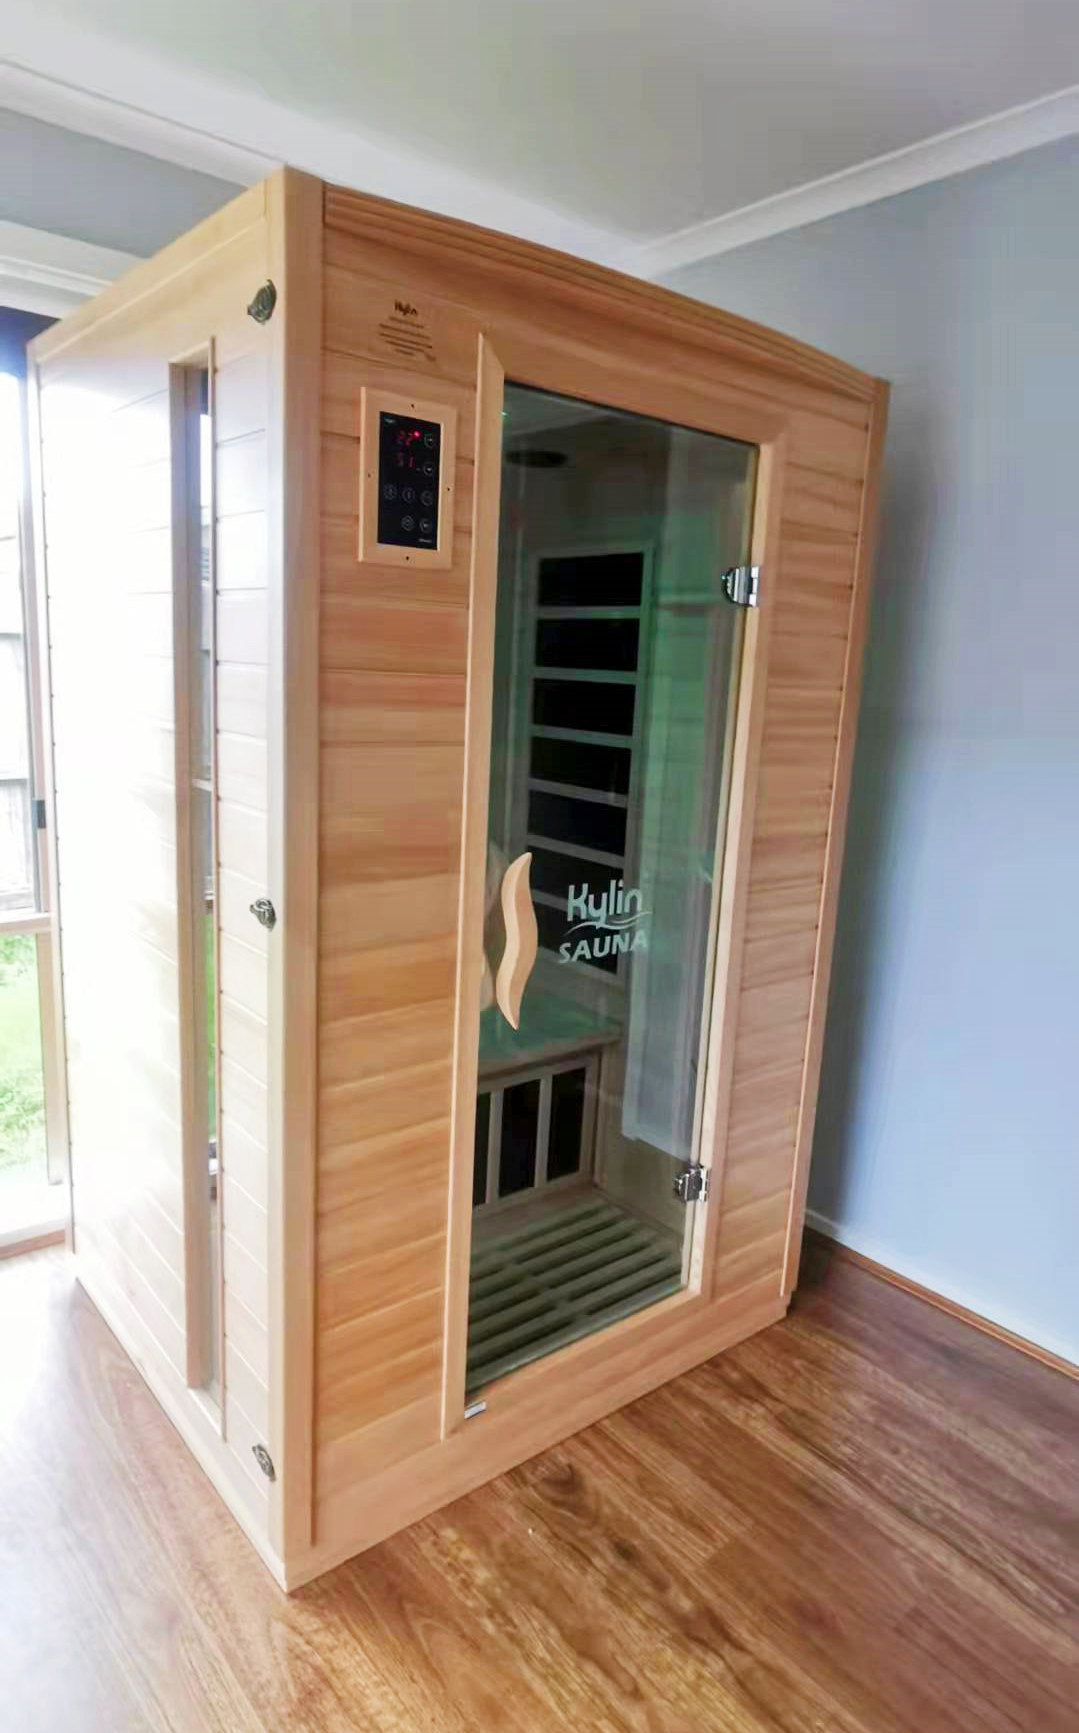 Kylin Low EMF Carbon Far Infrared Sauna Room 2 people – KY2A5-F with foot heater